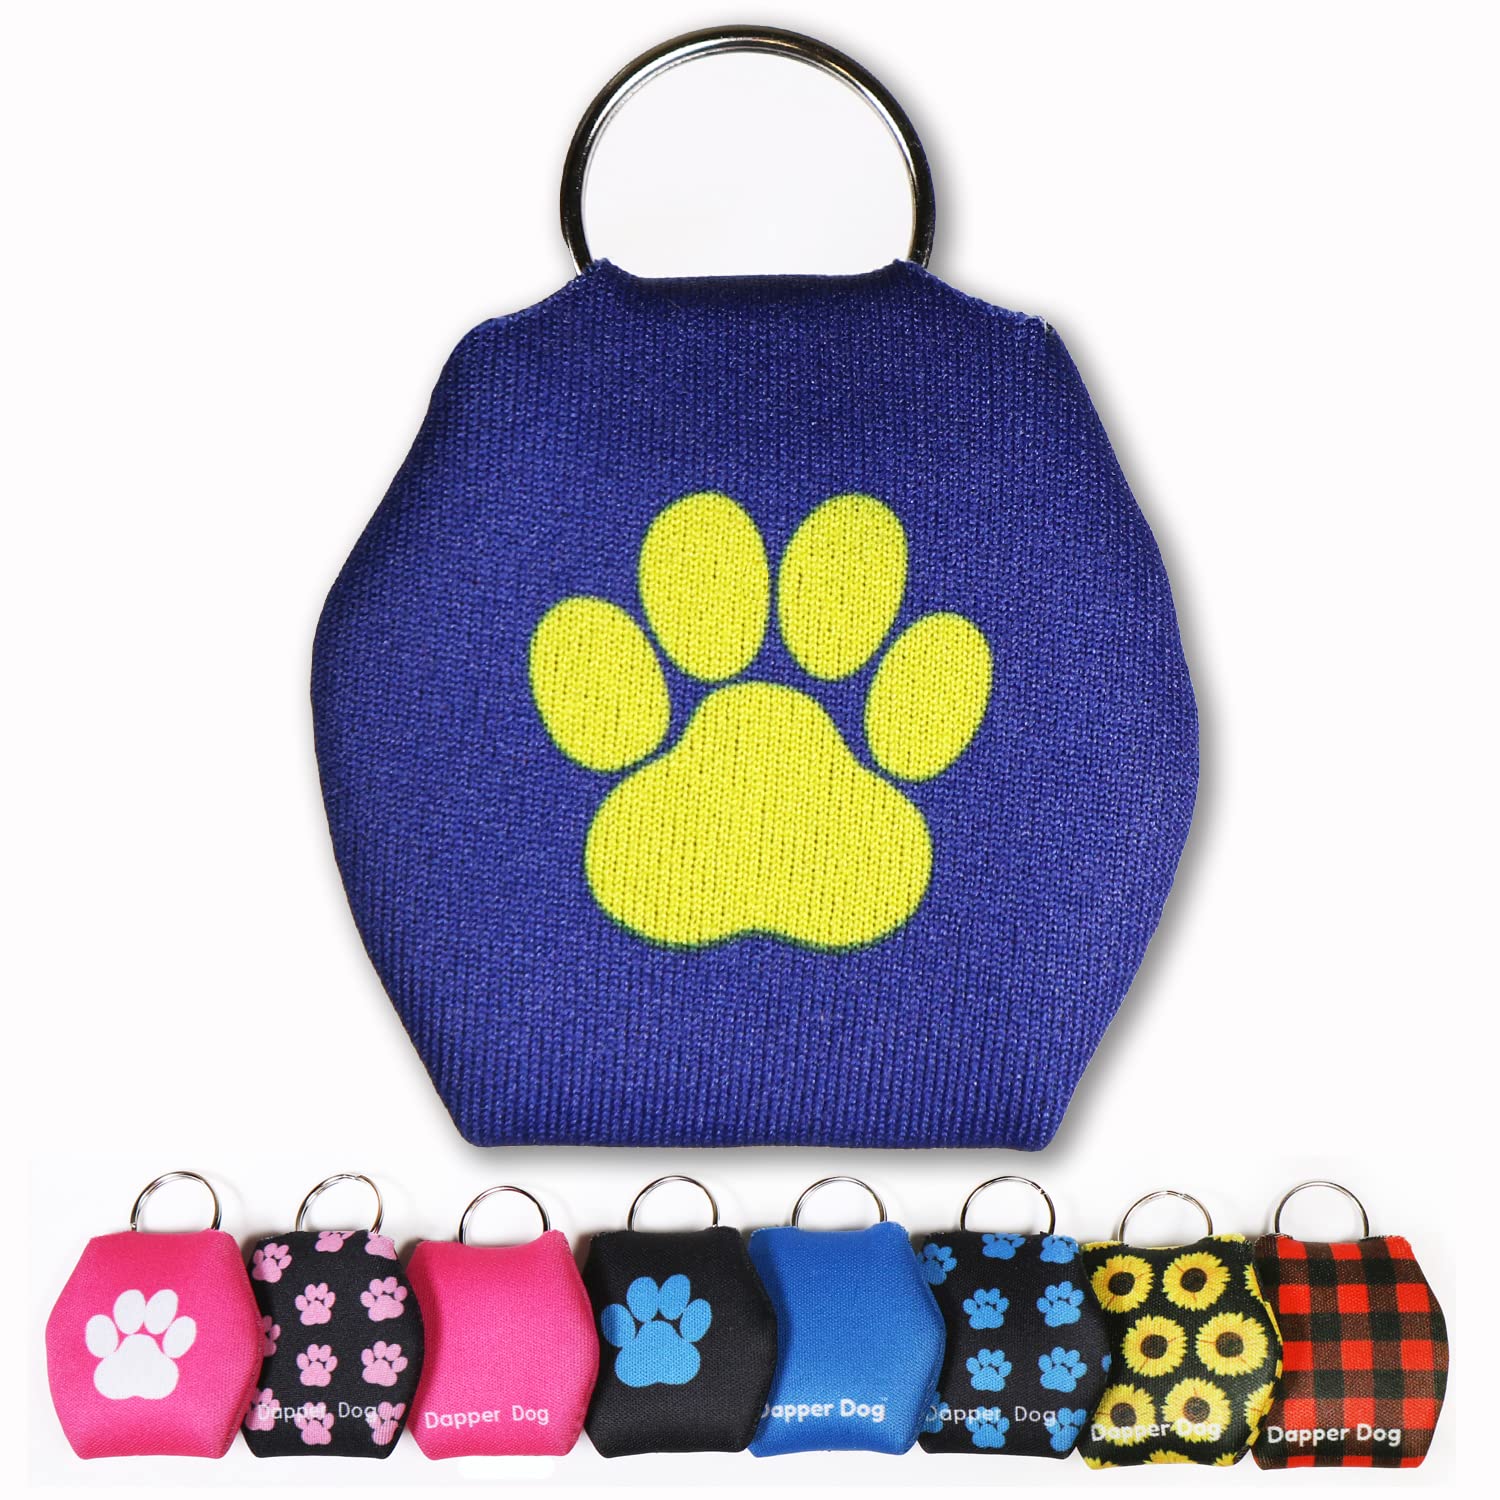 SilenTags Dapper Dog - Dog Tag Silencer with Tag Ring (Dark Blue with Yellow Paw Print)